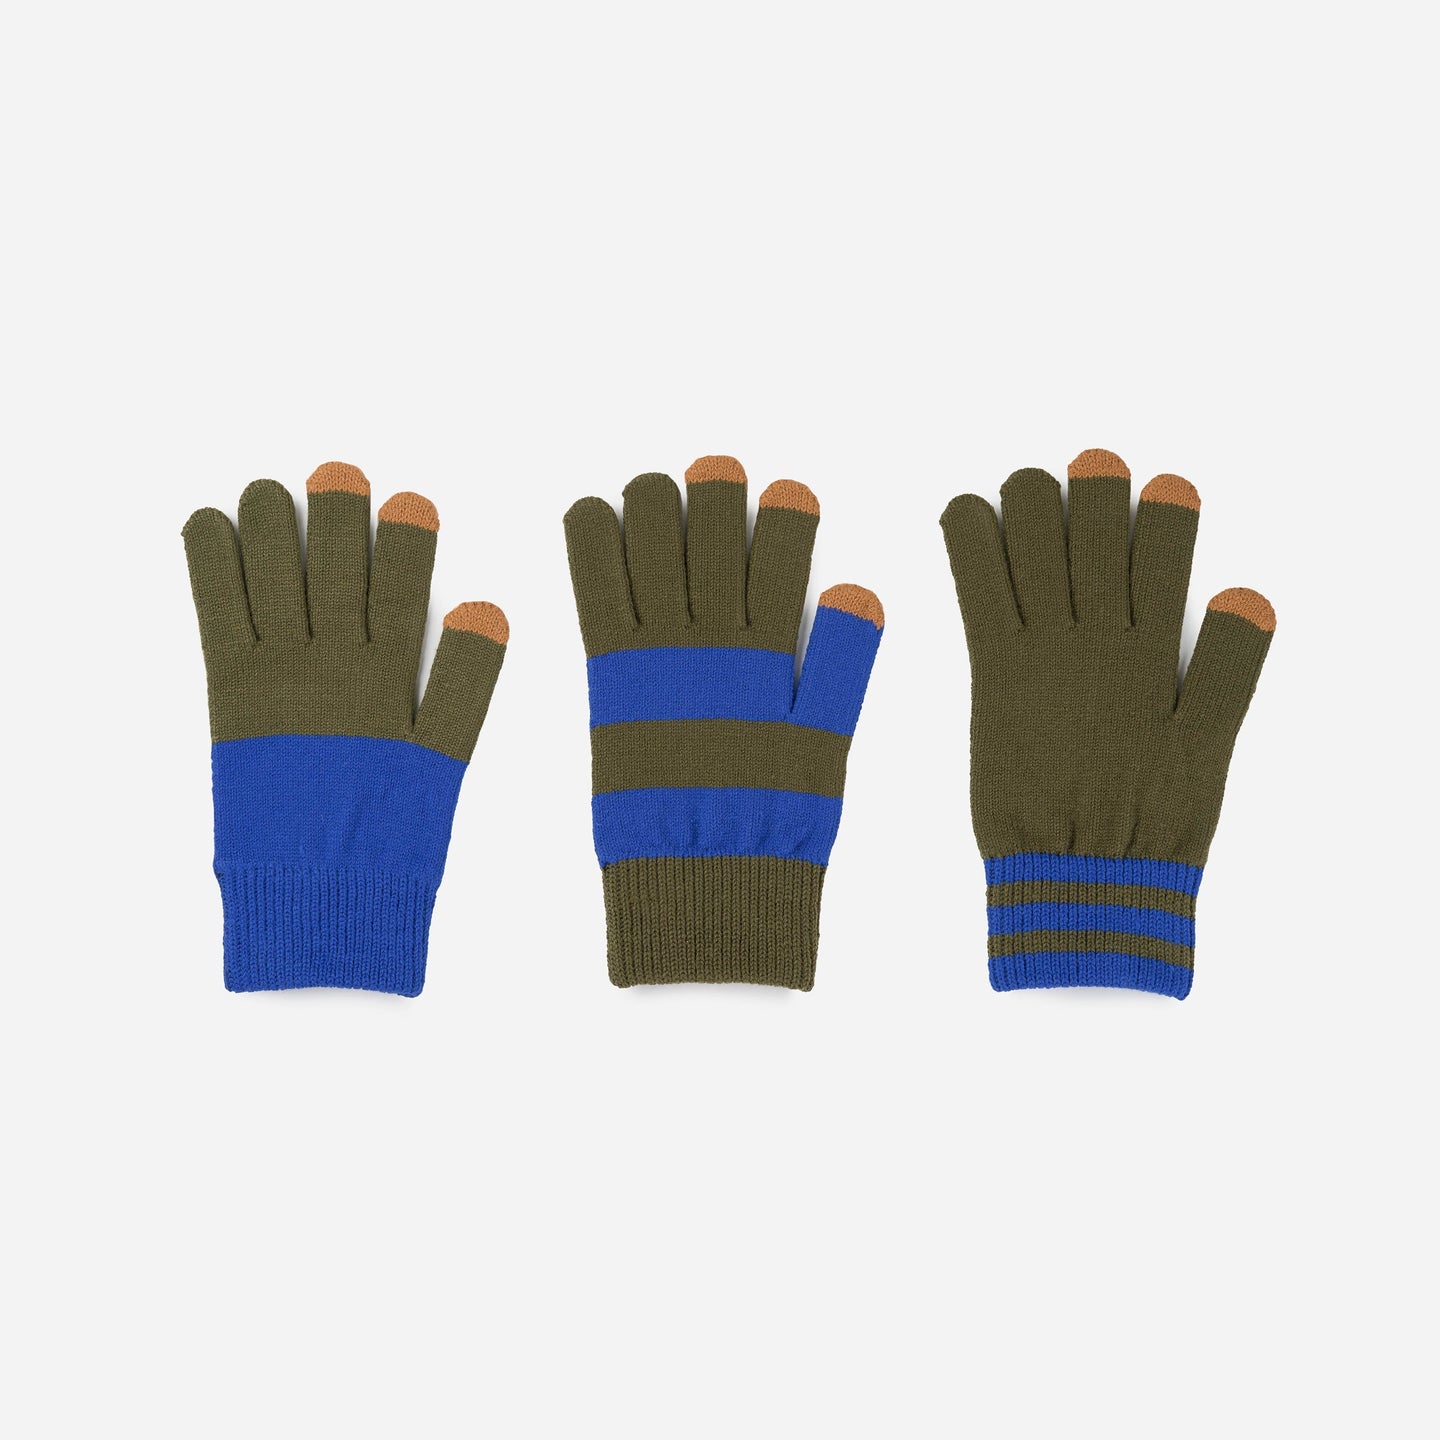 Pair and Spare 3 Gloves Set